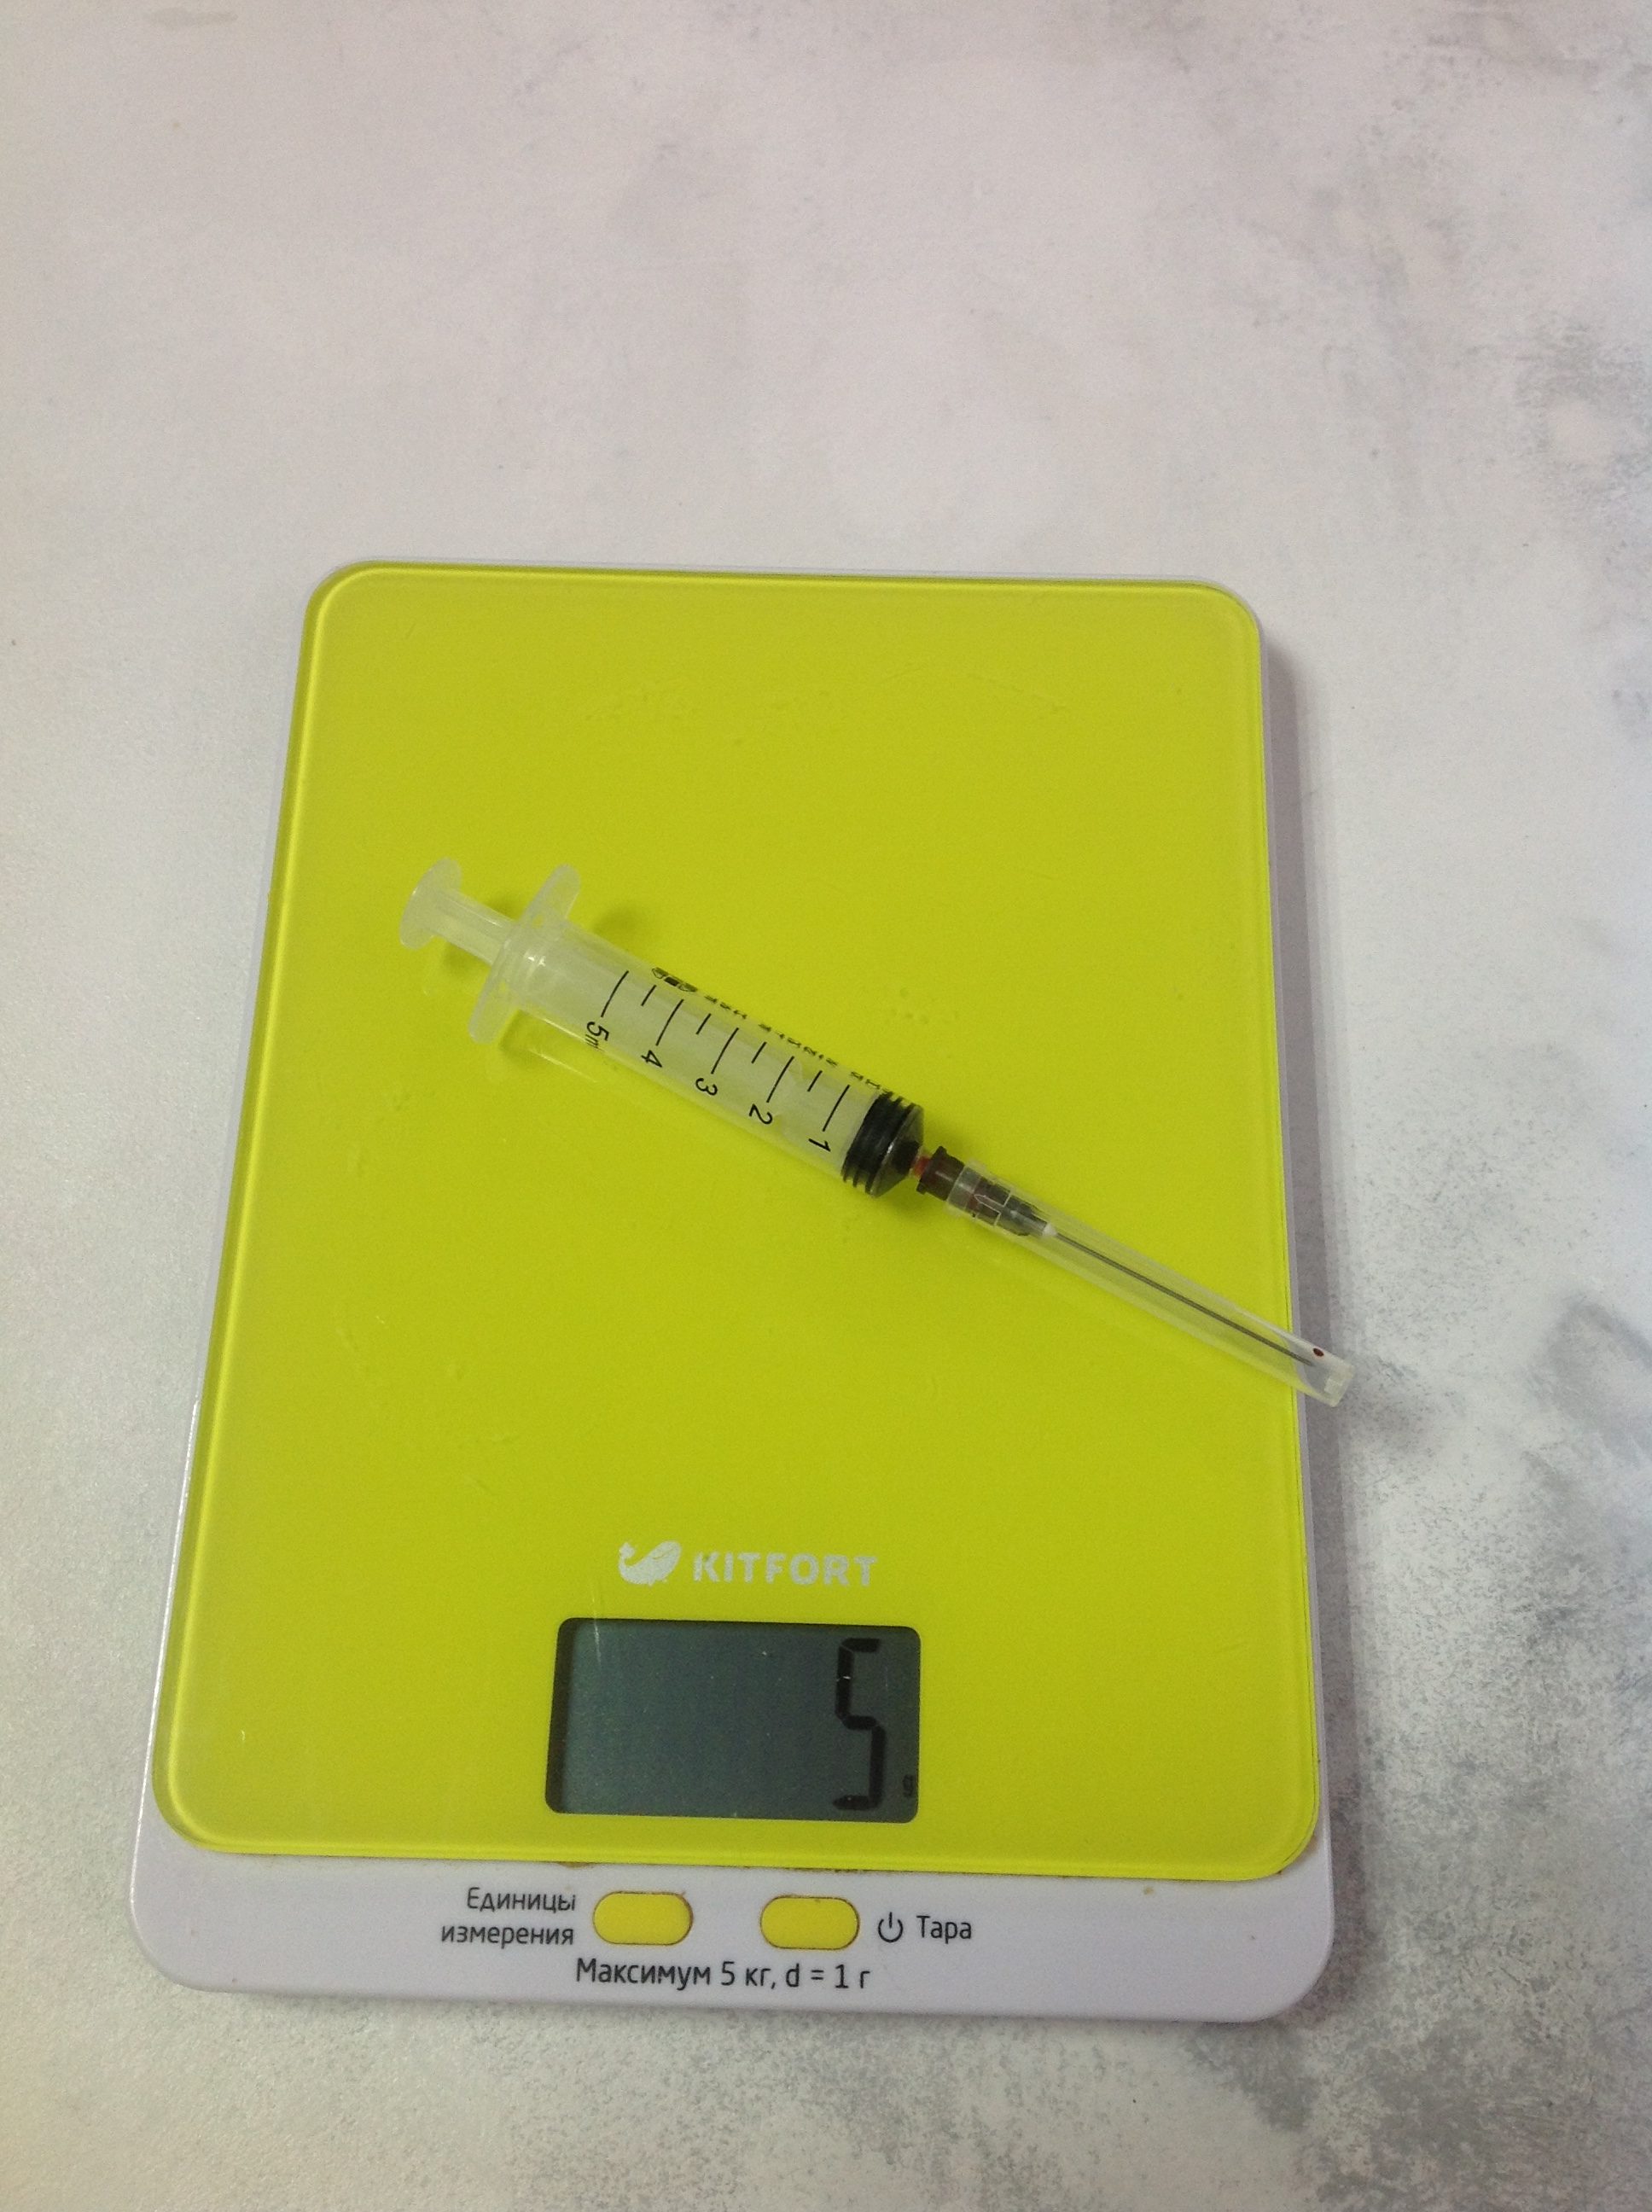 weight of a 5cc syringe